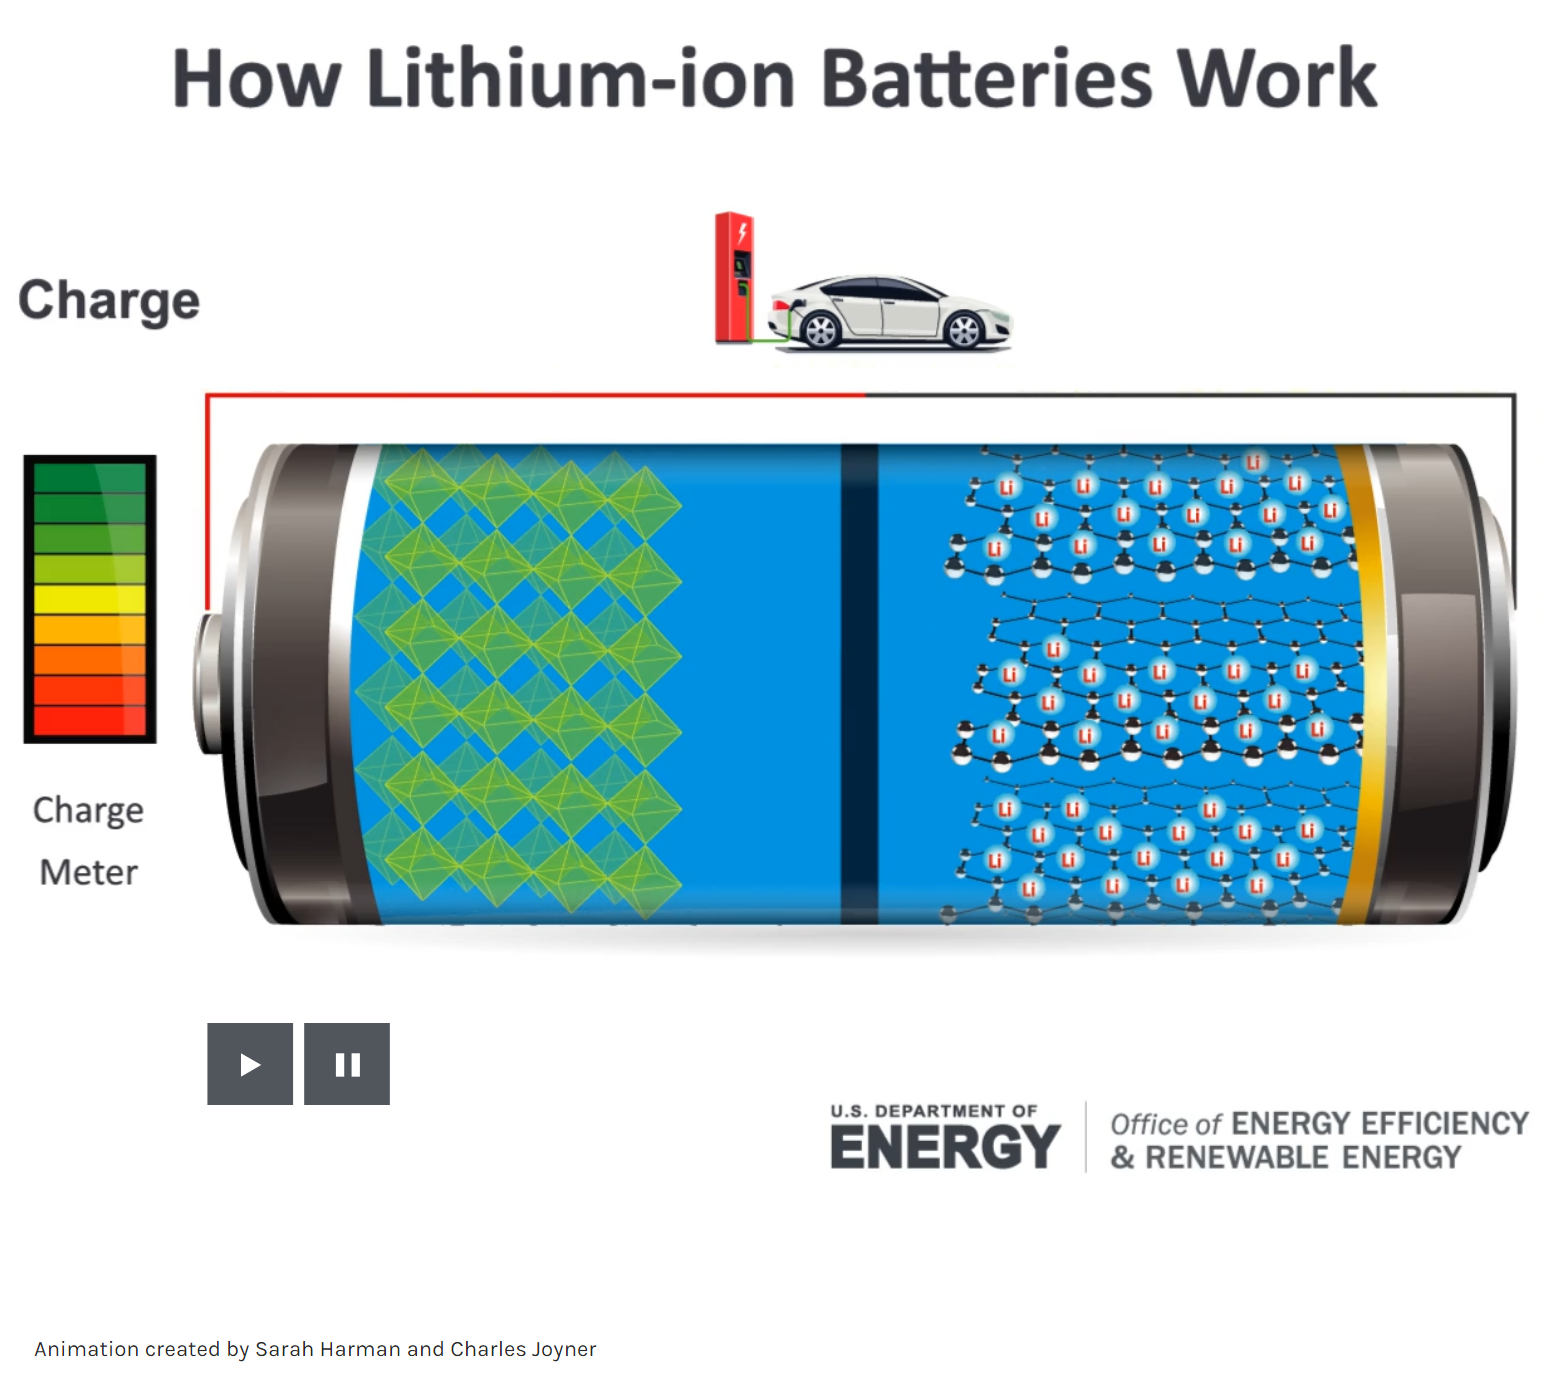 How Lithium-ion Batteries Work